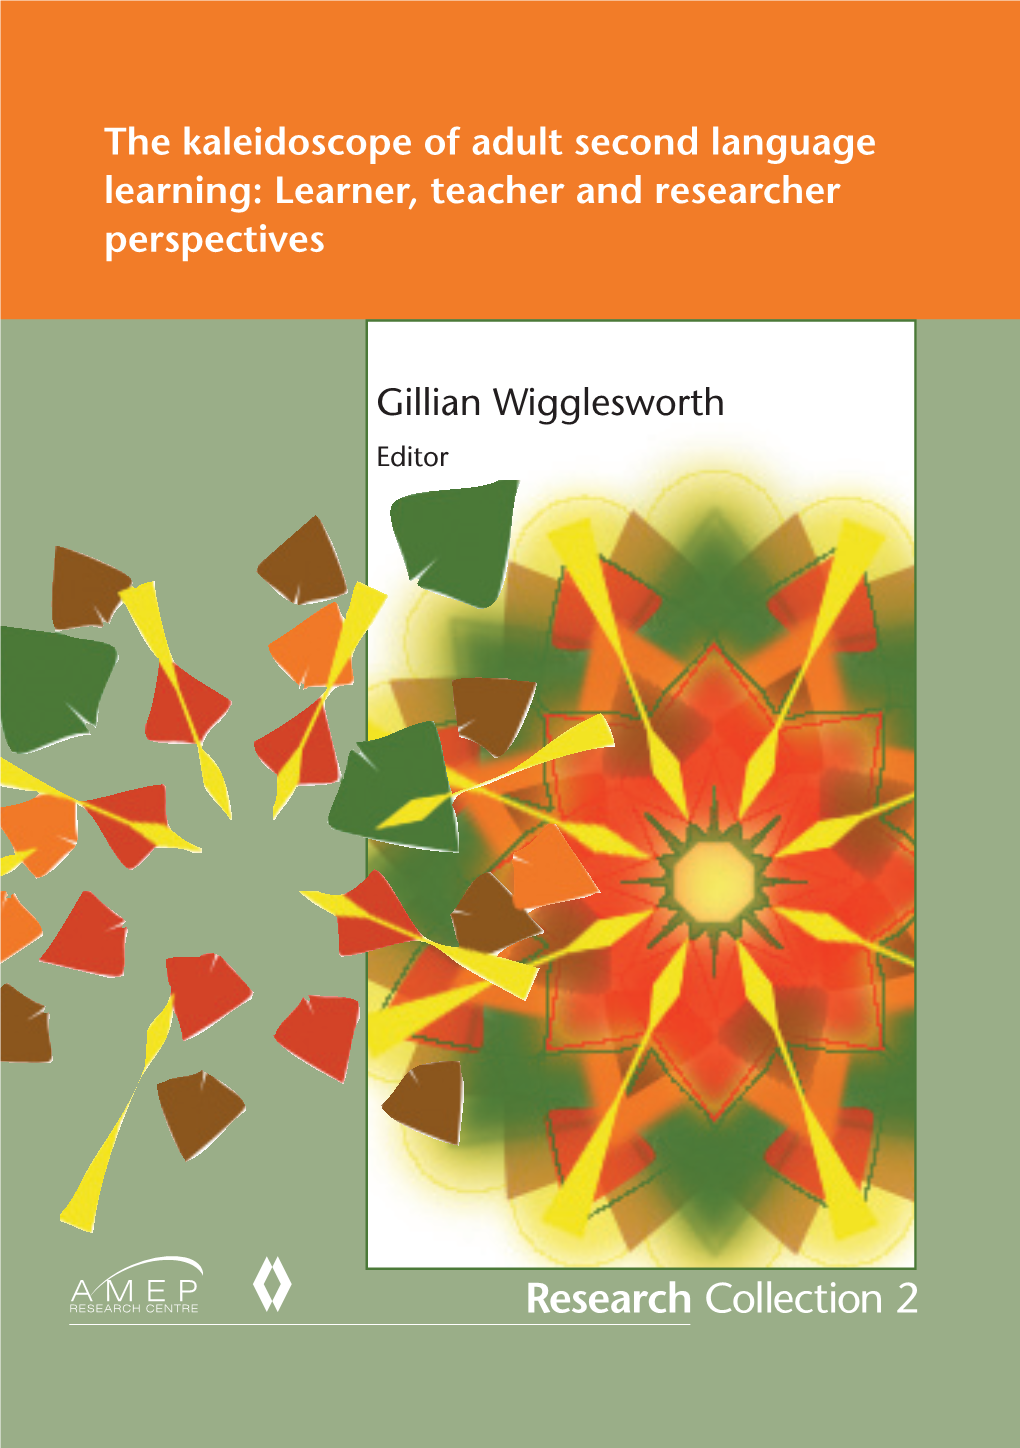 The Kaleidoscope of Adult Second Language Learning: Learner, Teacher and Researcher Perspectives